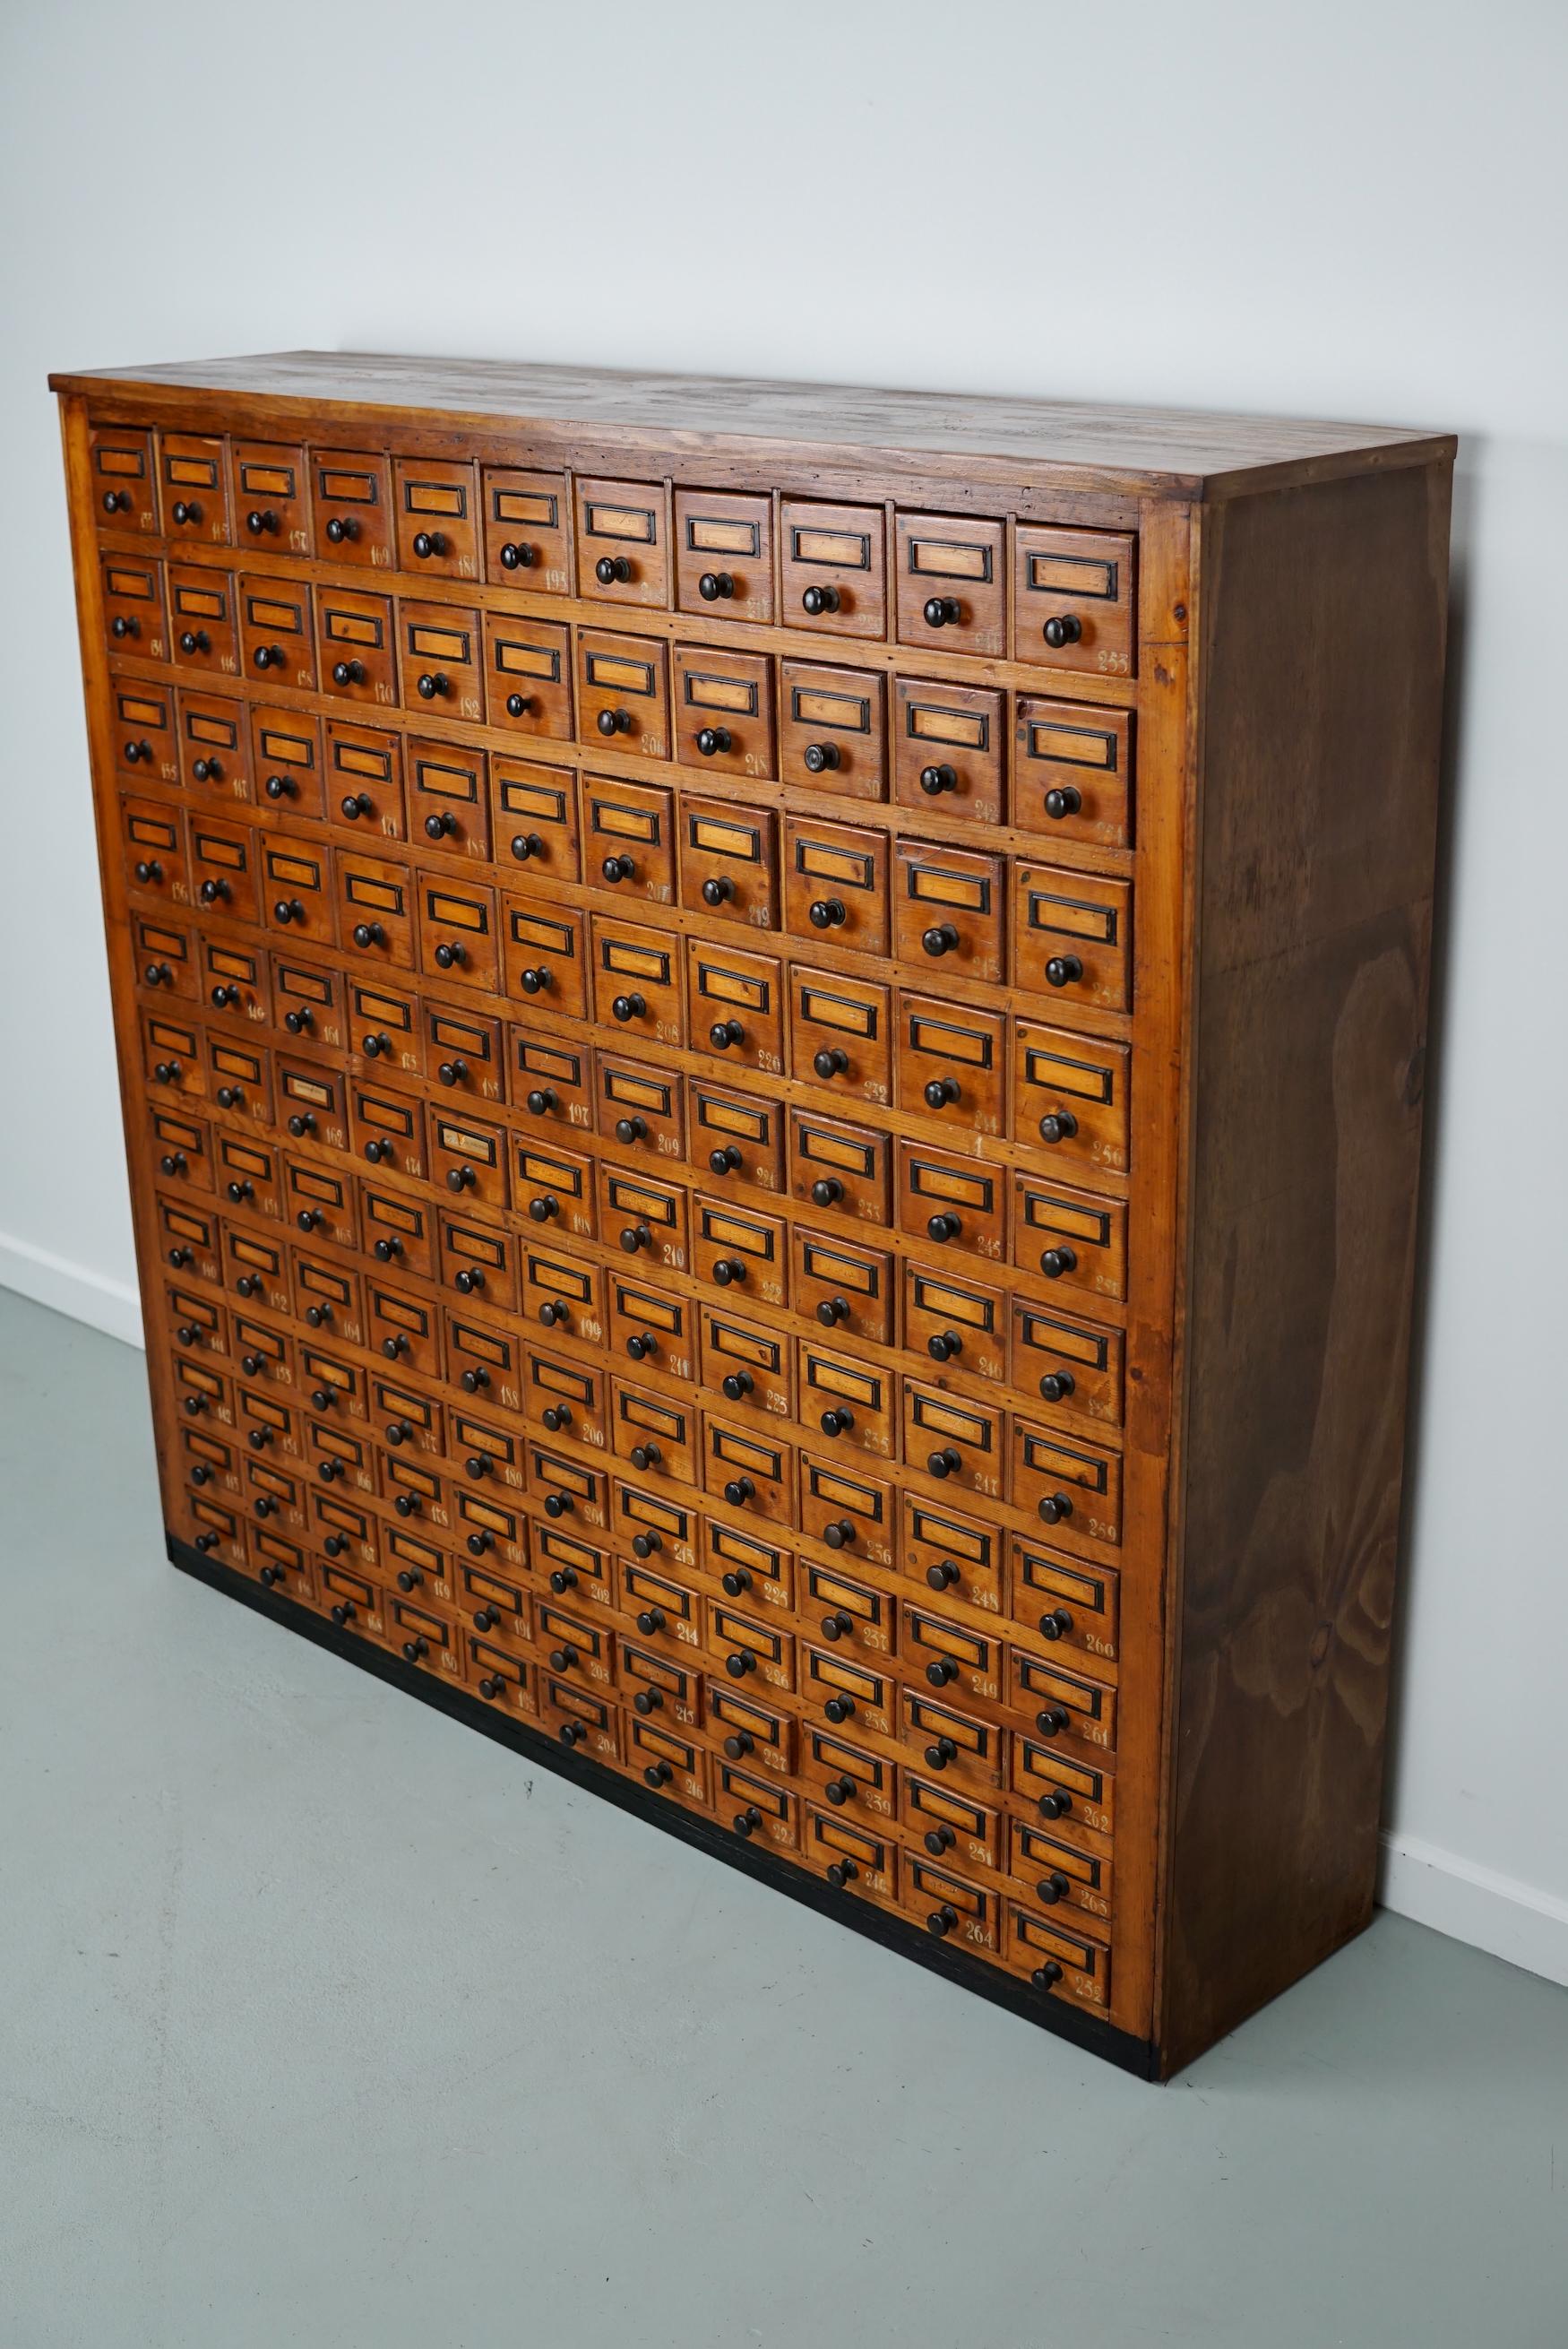 This workshop cabinet was made from pine in the Netherlands circa 1930s and it was used in a workshop for dentist equipment. It features many drawers with small knobs and name card holders. The interior dimensions of the drawers are: DWH 25 x 8 x 8